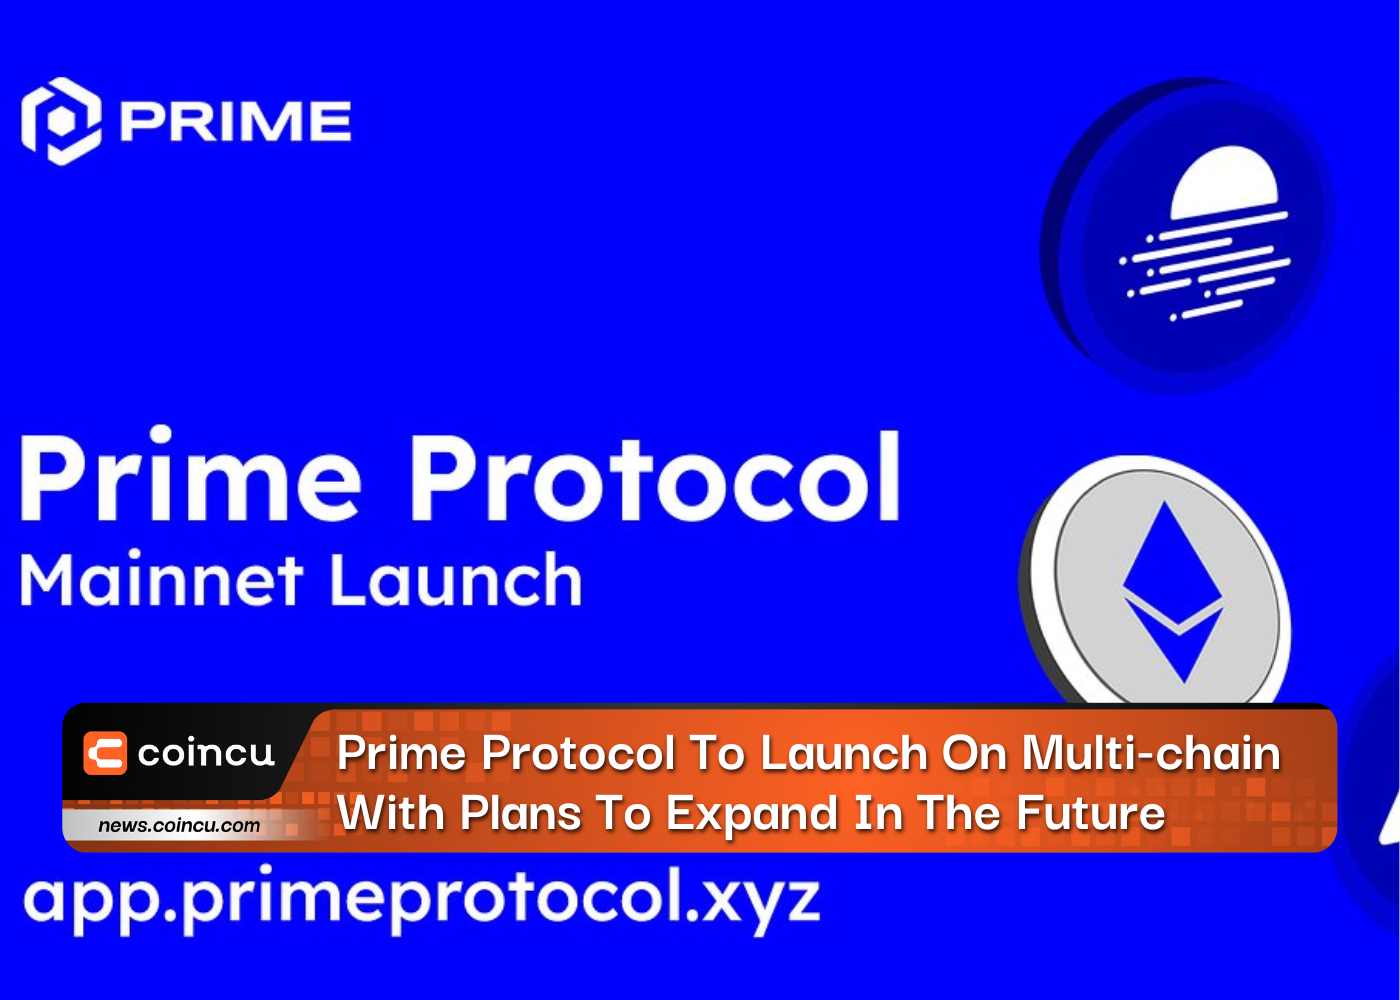 Prime Protocol To Launch On Multi-chain With Plans To Expand In The Future